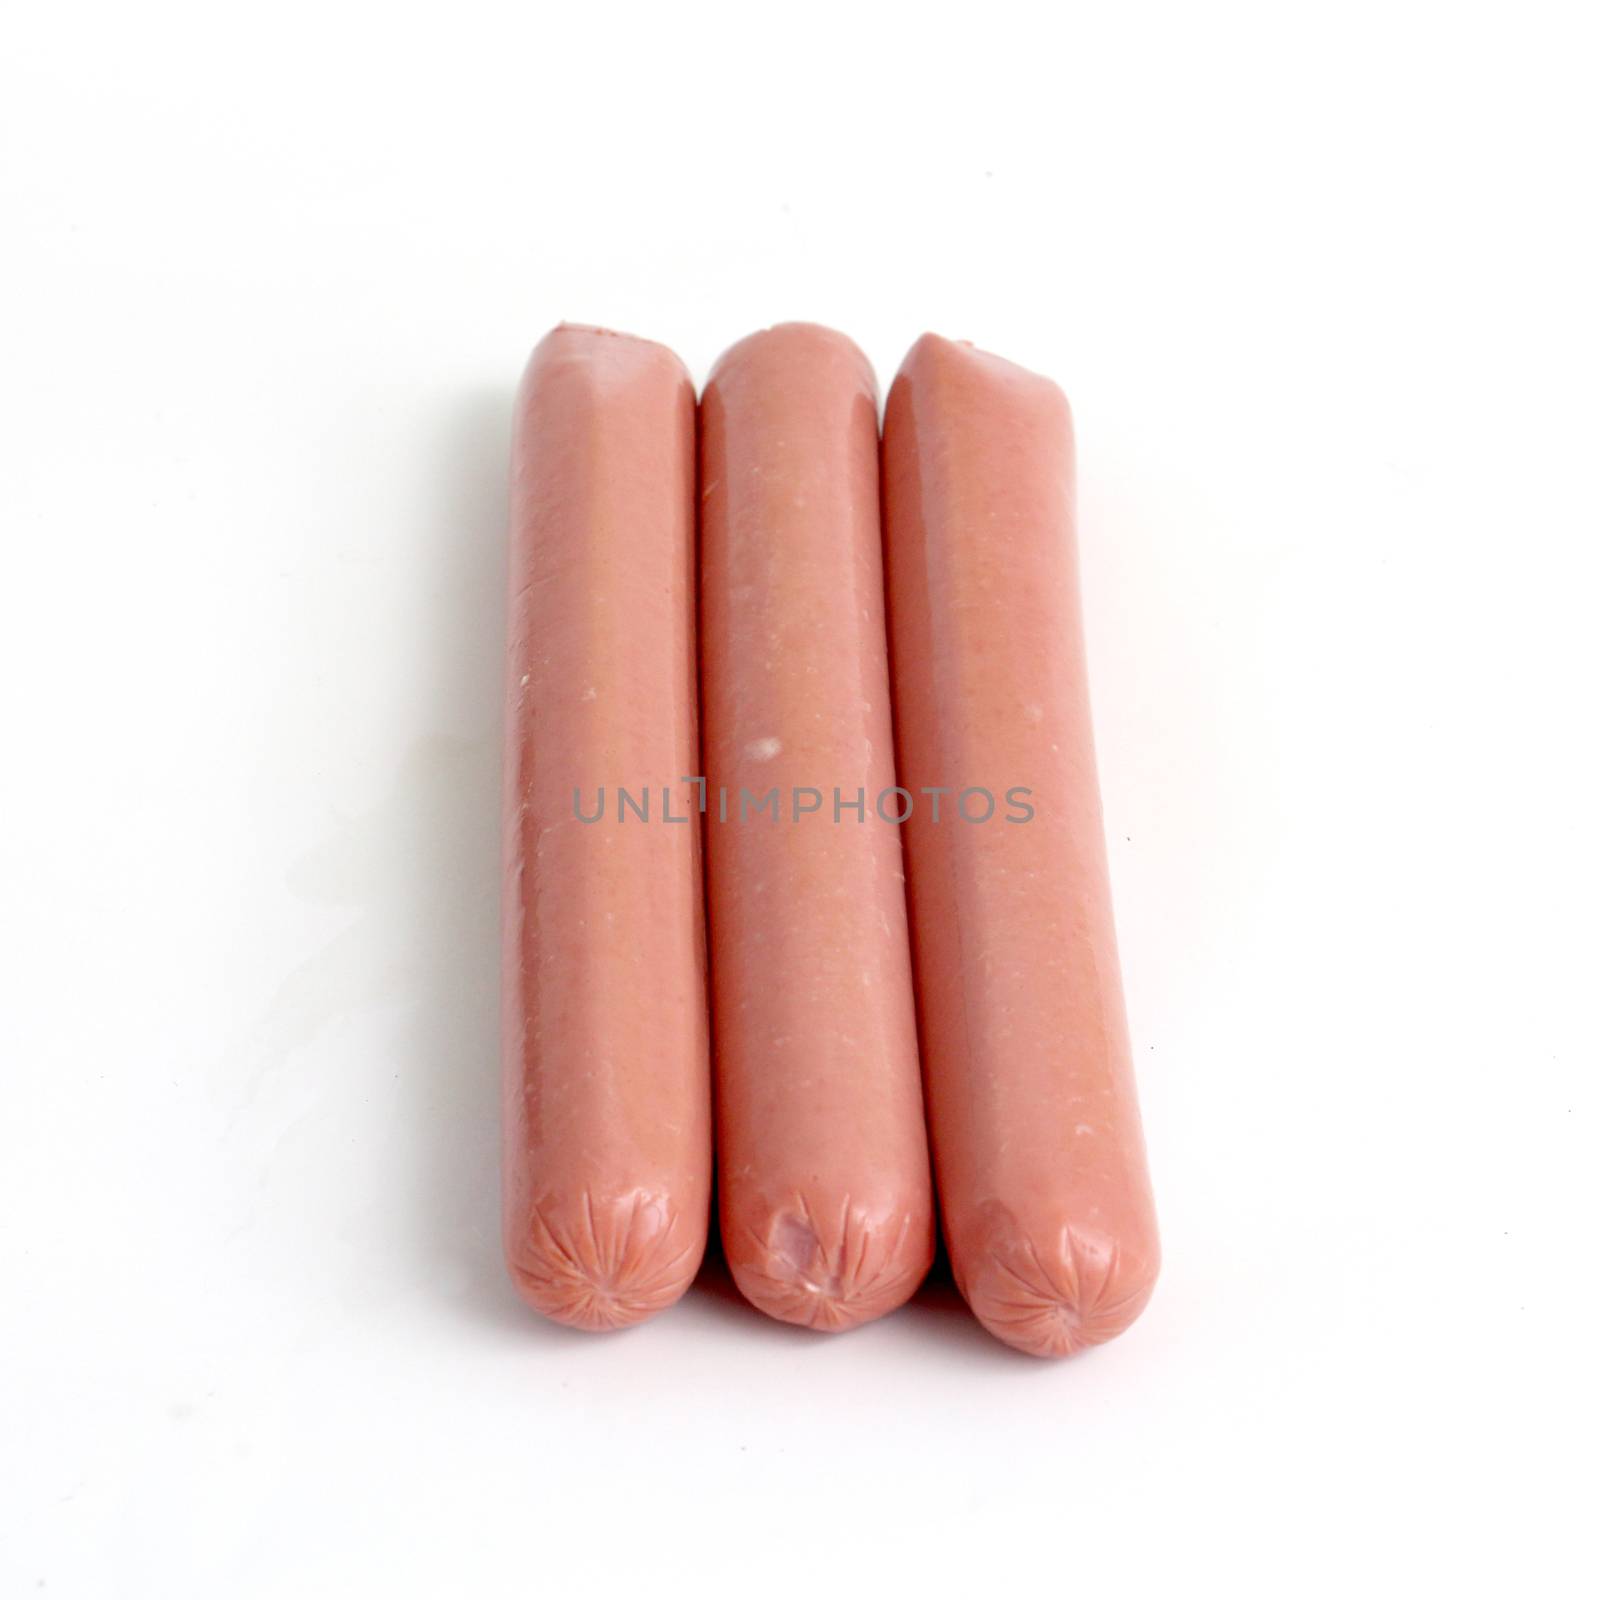 picture of a hot dog sausages on white background